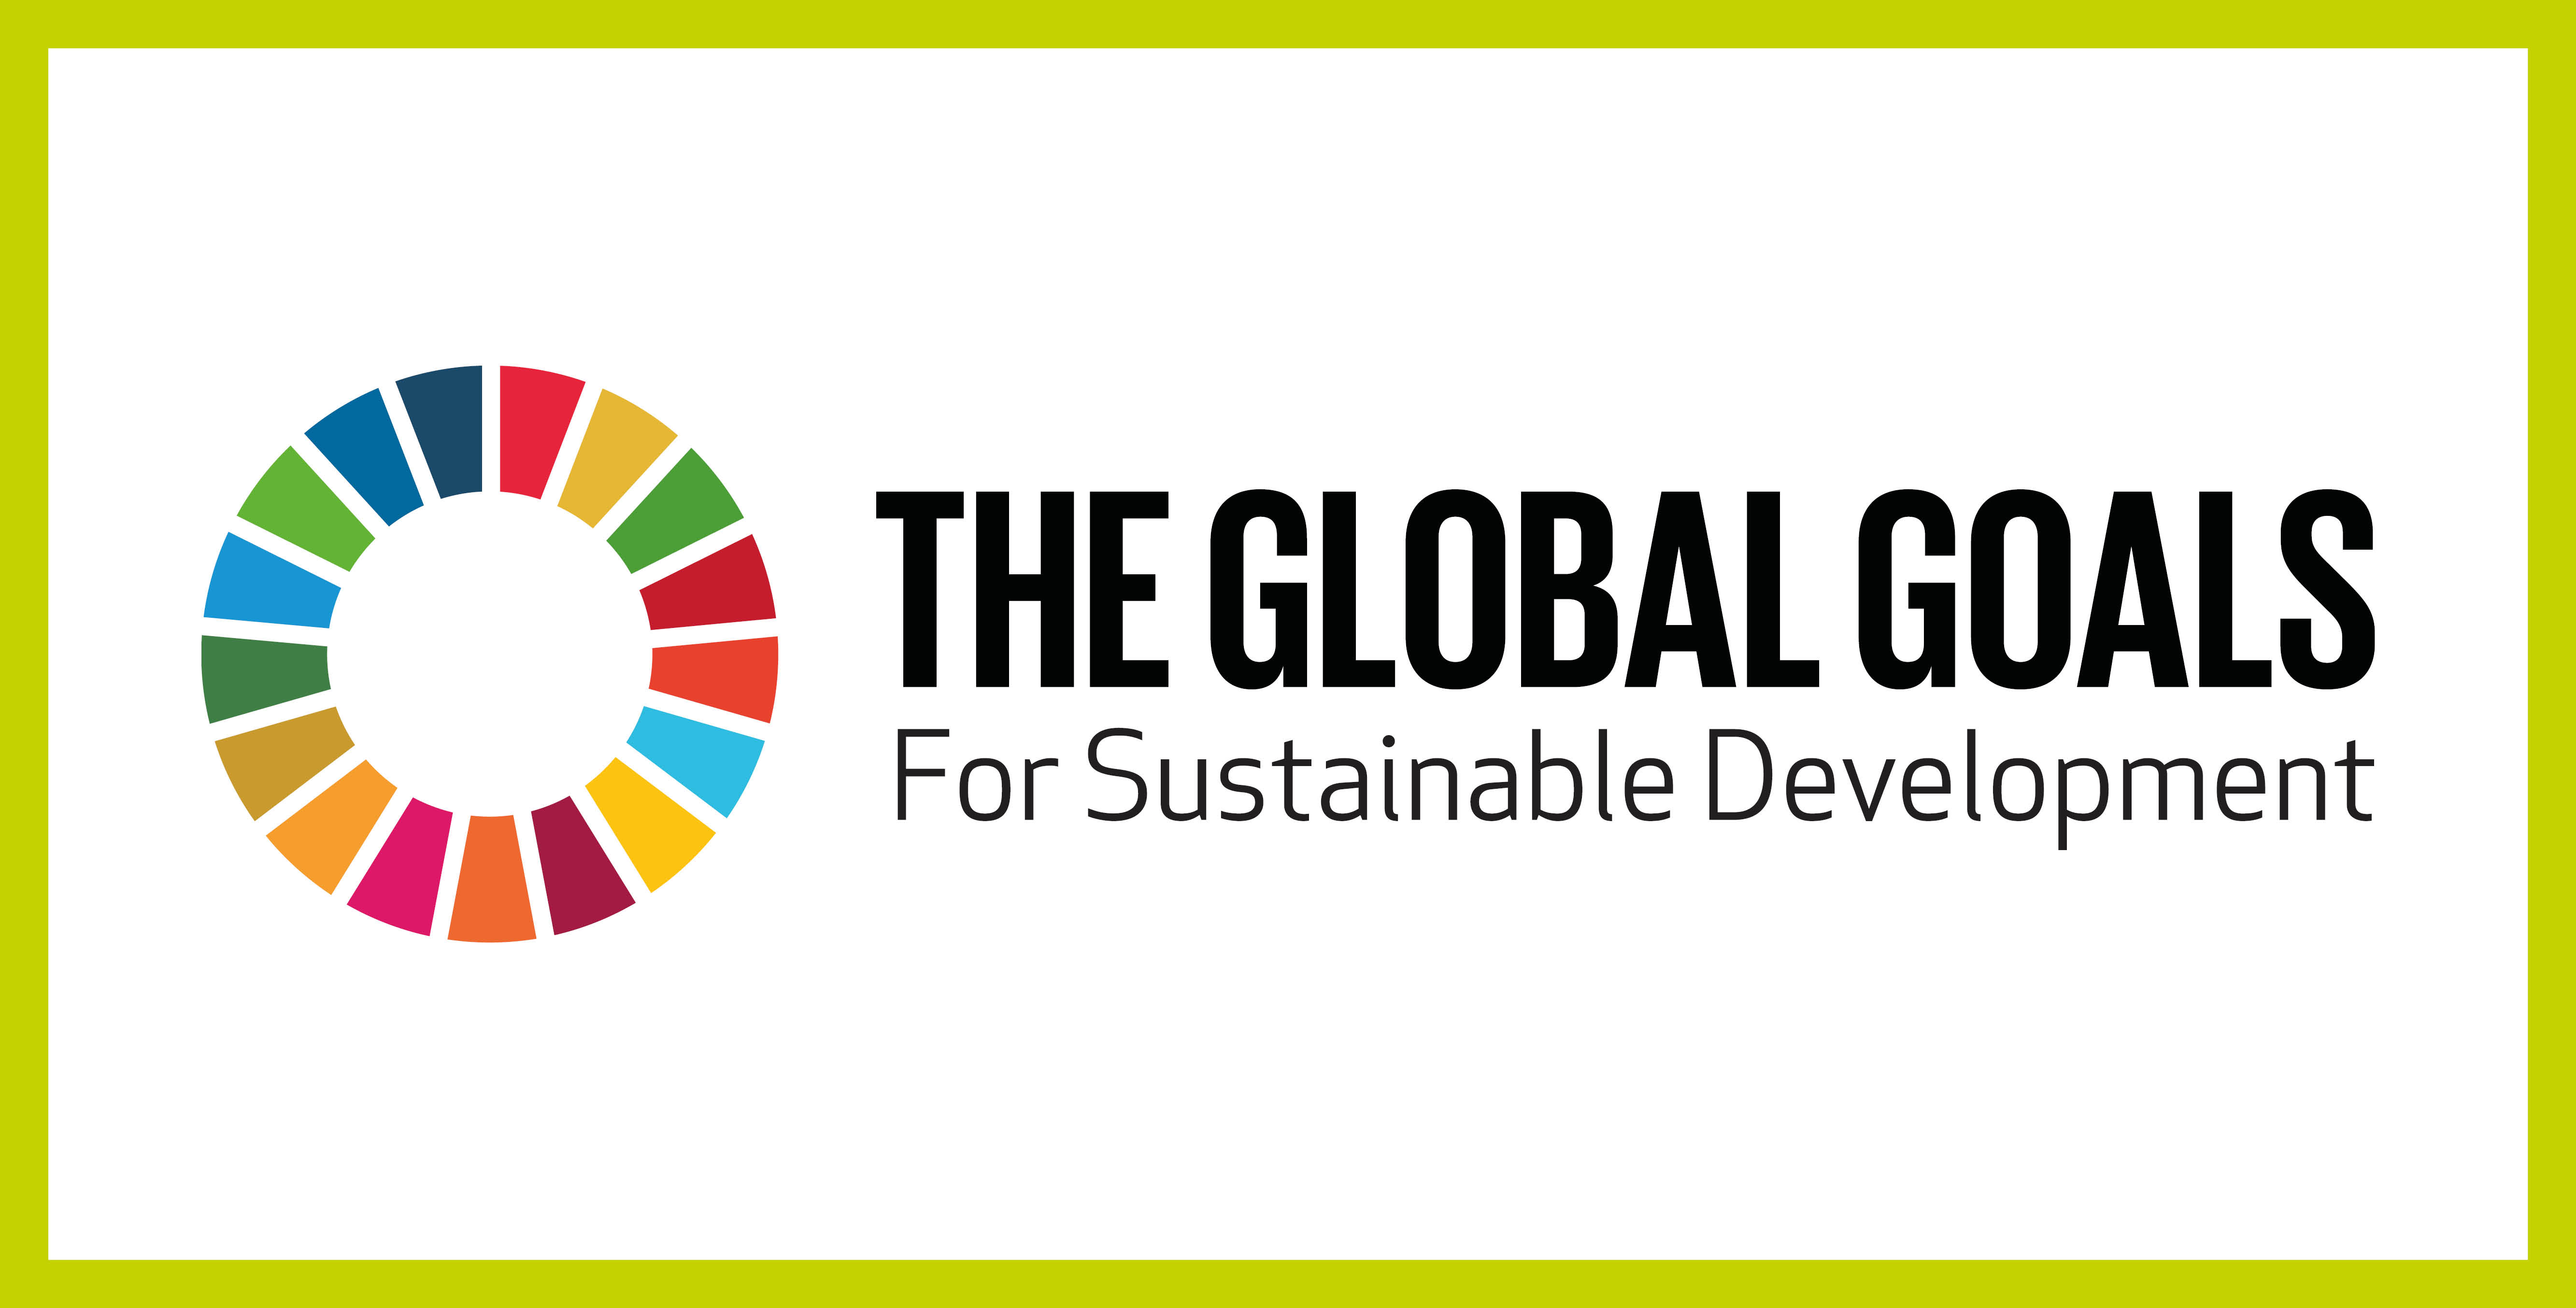 Sustainable development goals and Global Mental Health